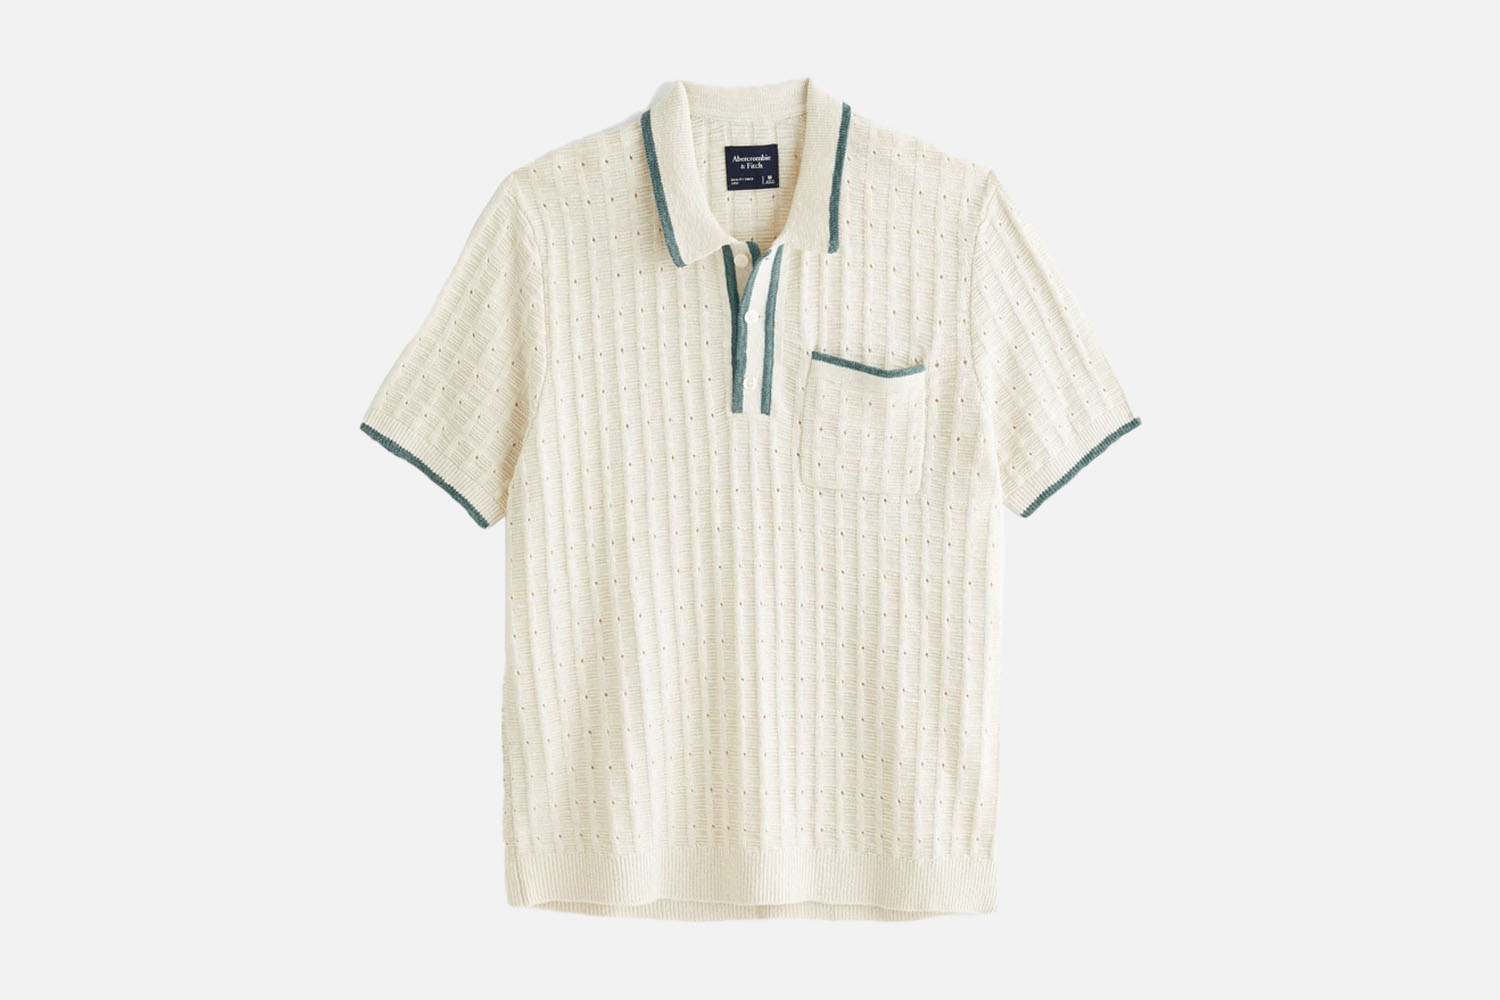 The Everyman's Choice: Abercrombie & Fitch Sideline-Style Sweater Polo